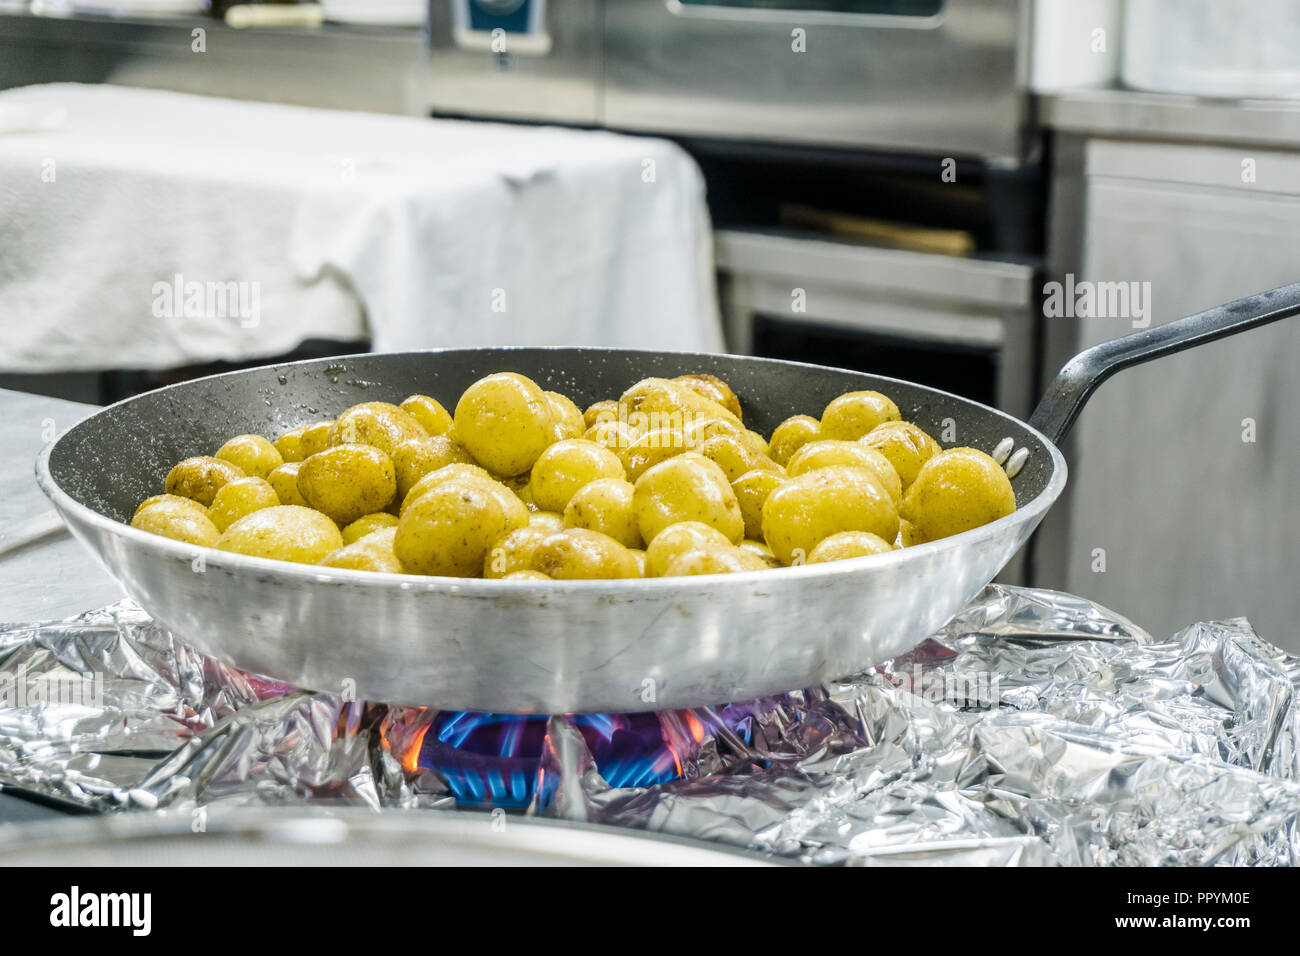 Many small potatoes fried on silver pan in the kitchen Stock Photo